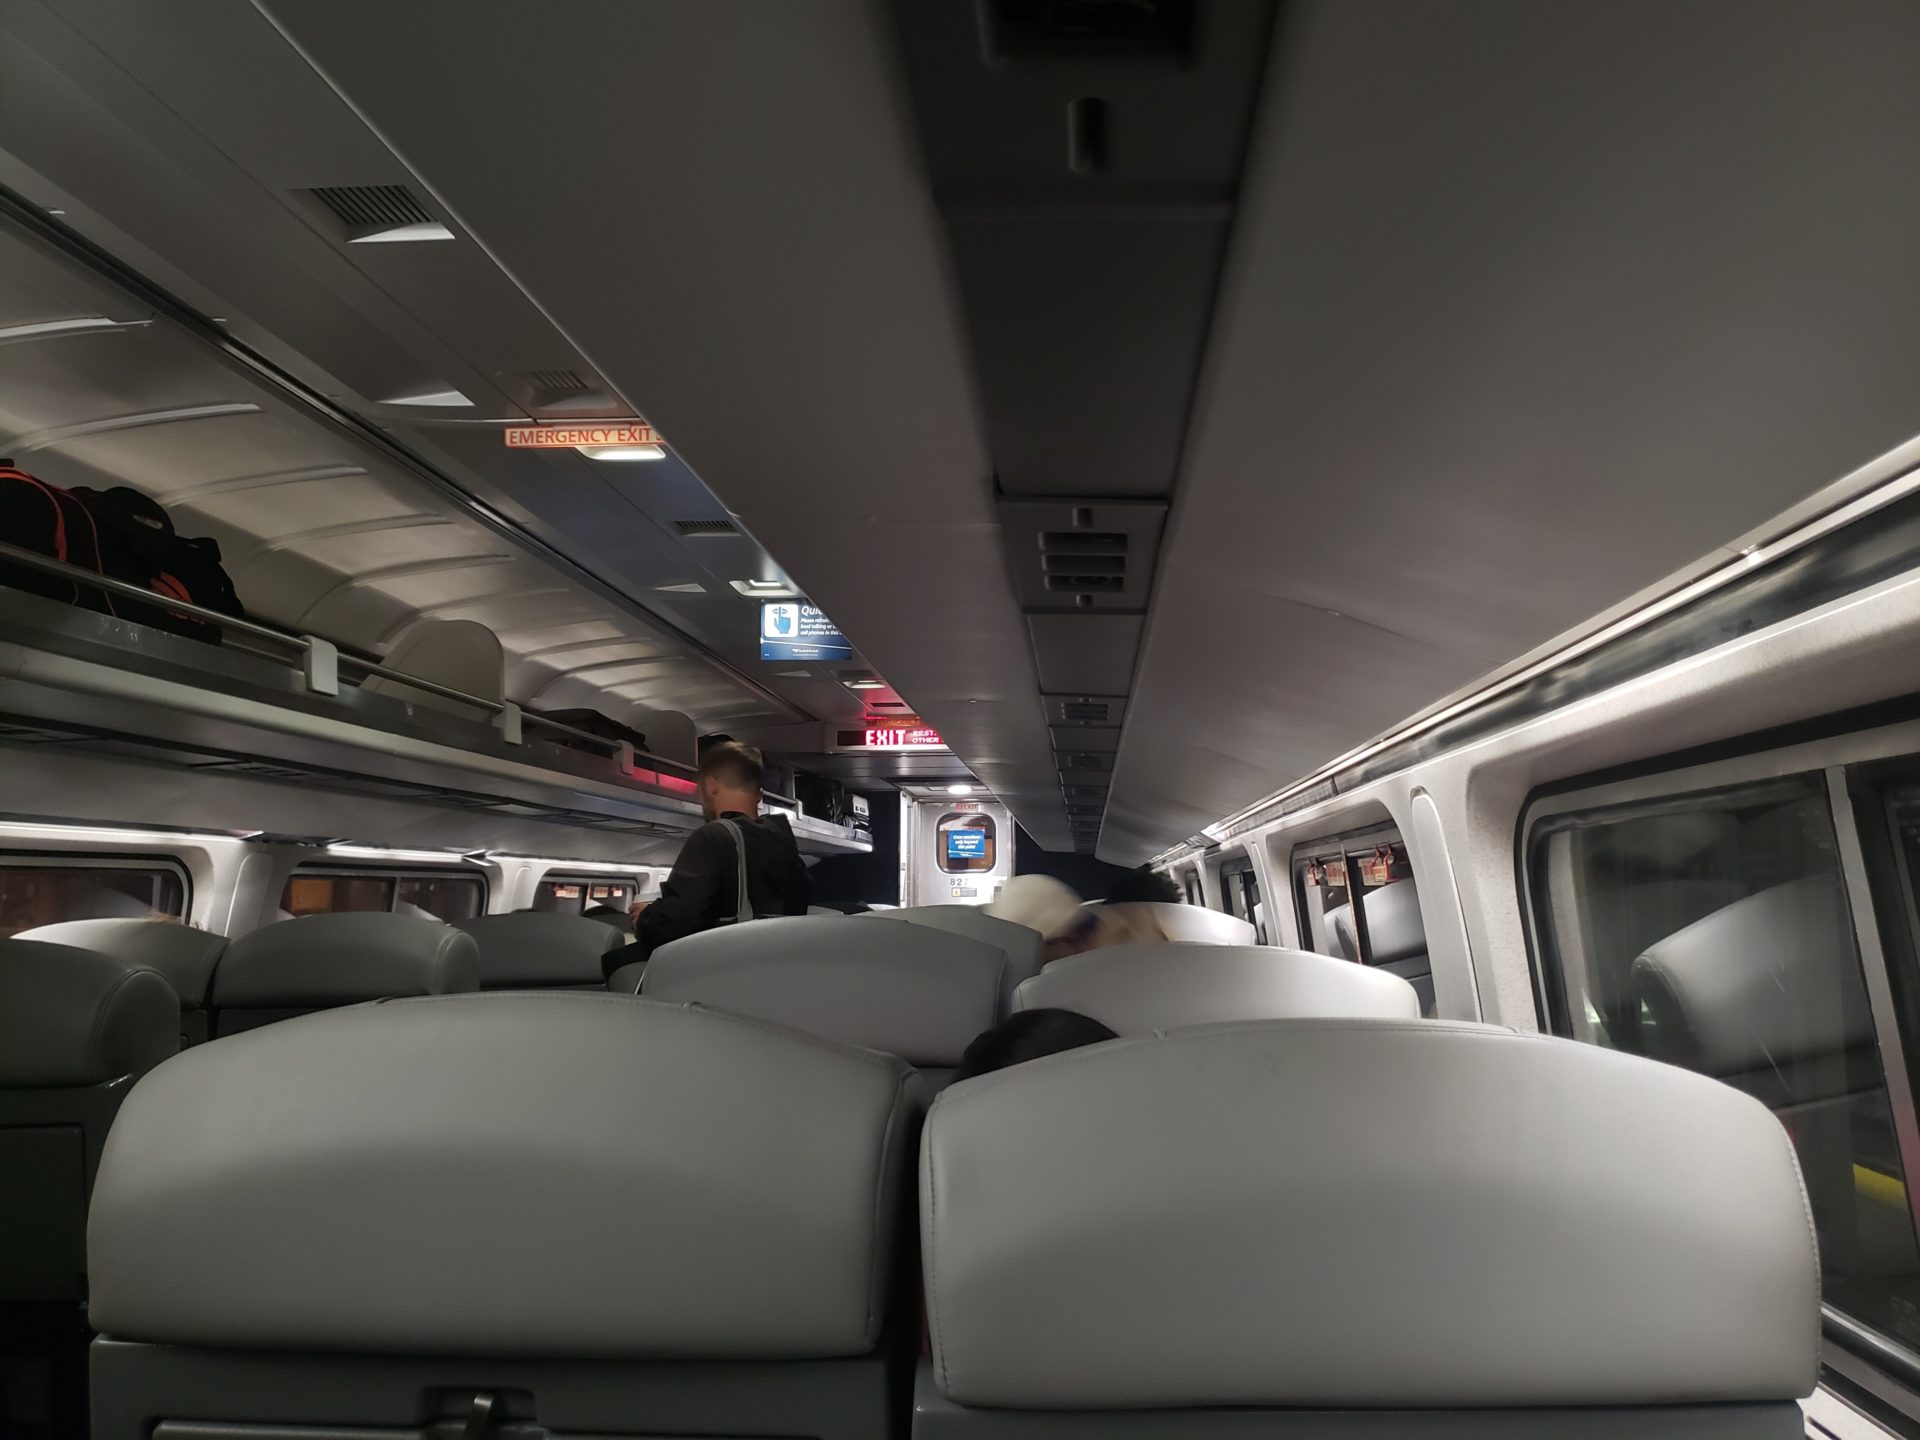 inside a train with people on it